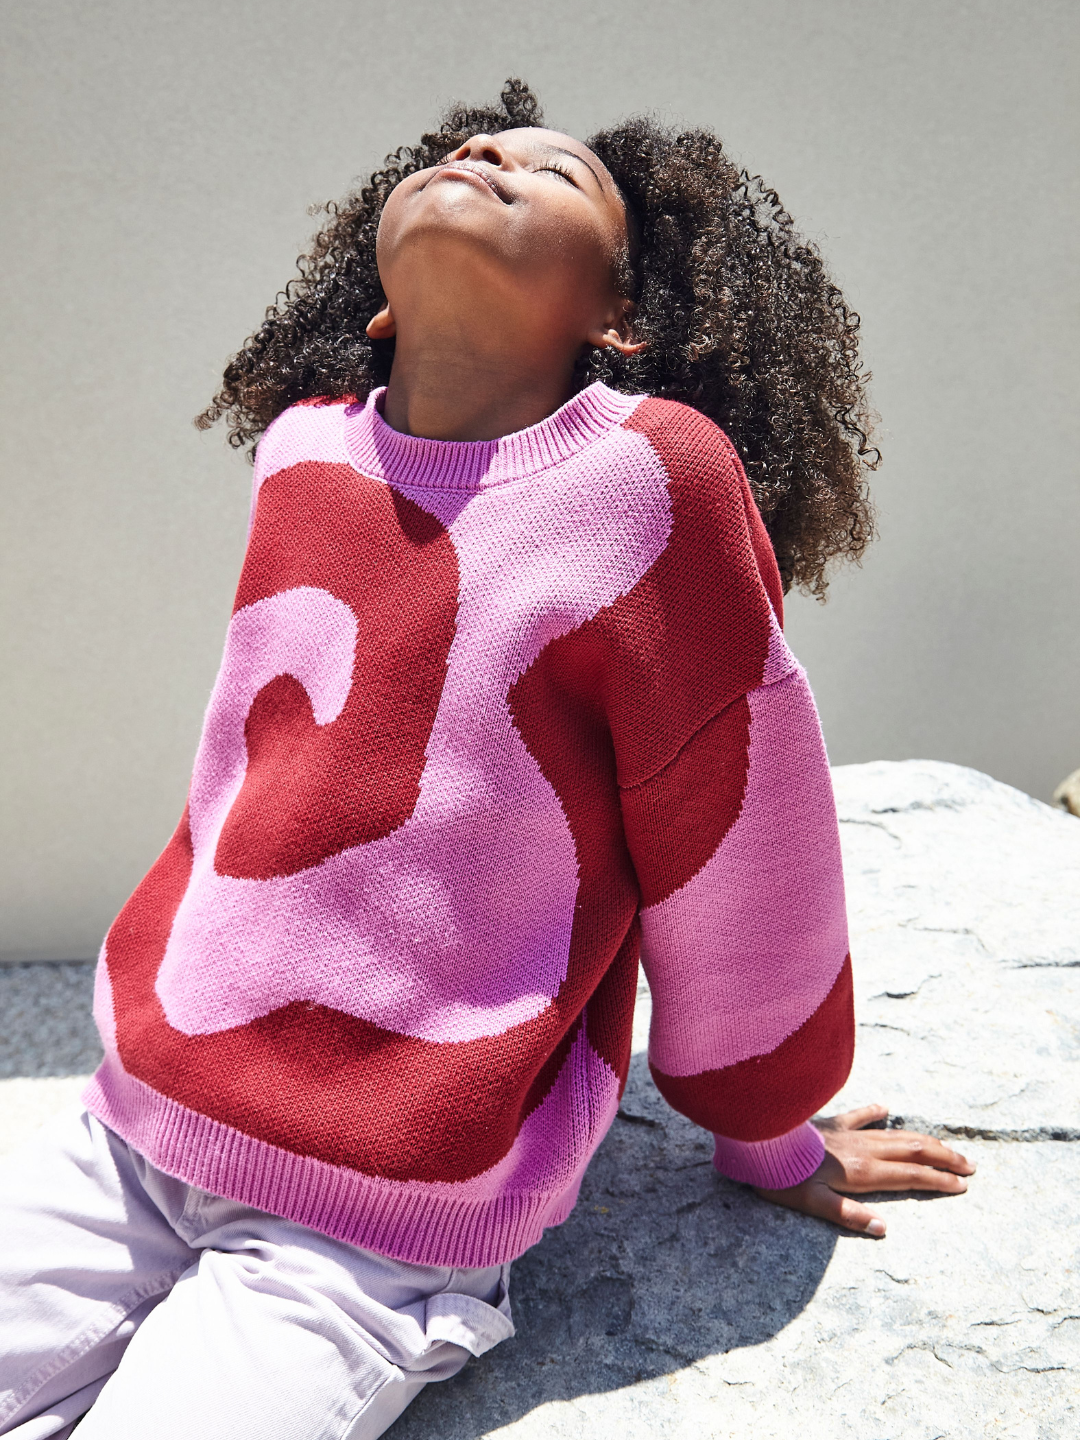 A girl wearing a kids crewneck sweater in bright pink, with a large single red swirl design that covers the entire sweater. She is seated on a rock, with her face turned upwards towards the sun. She wears light purple pants.